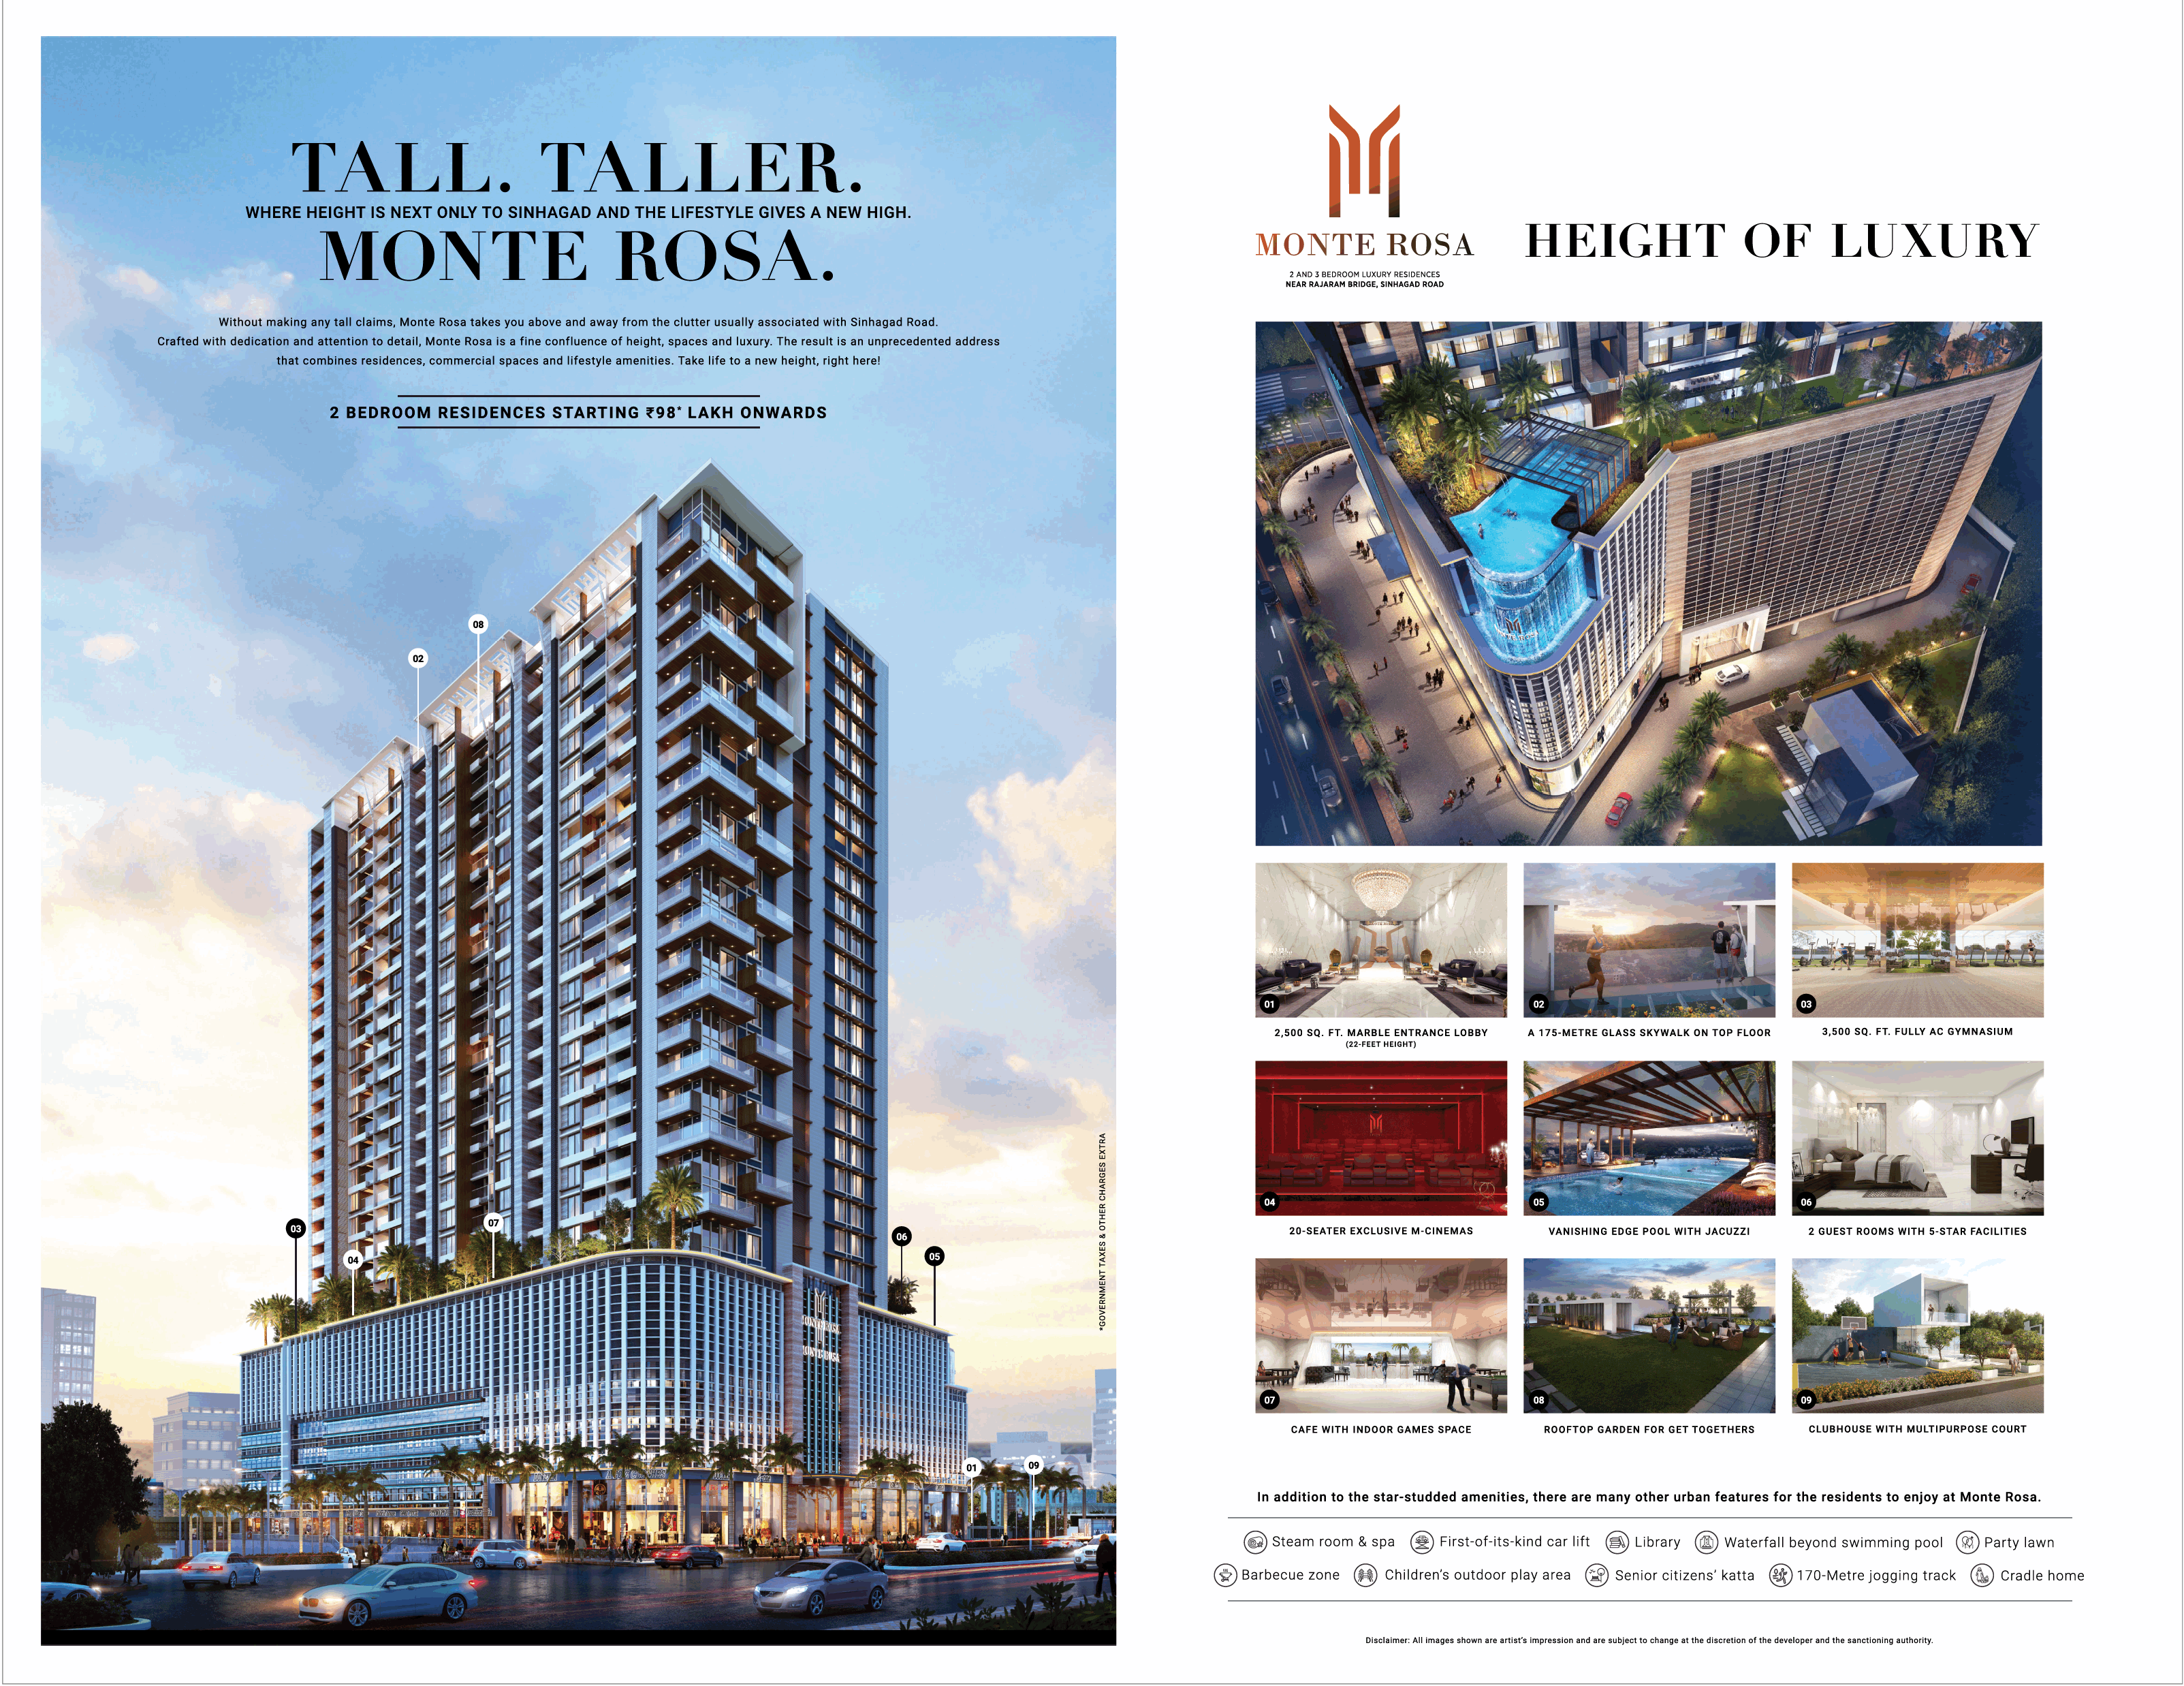 BKP Monte Rosa launching 2 bedroom residences at Rs. 98 lakhs in Pune Update